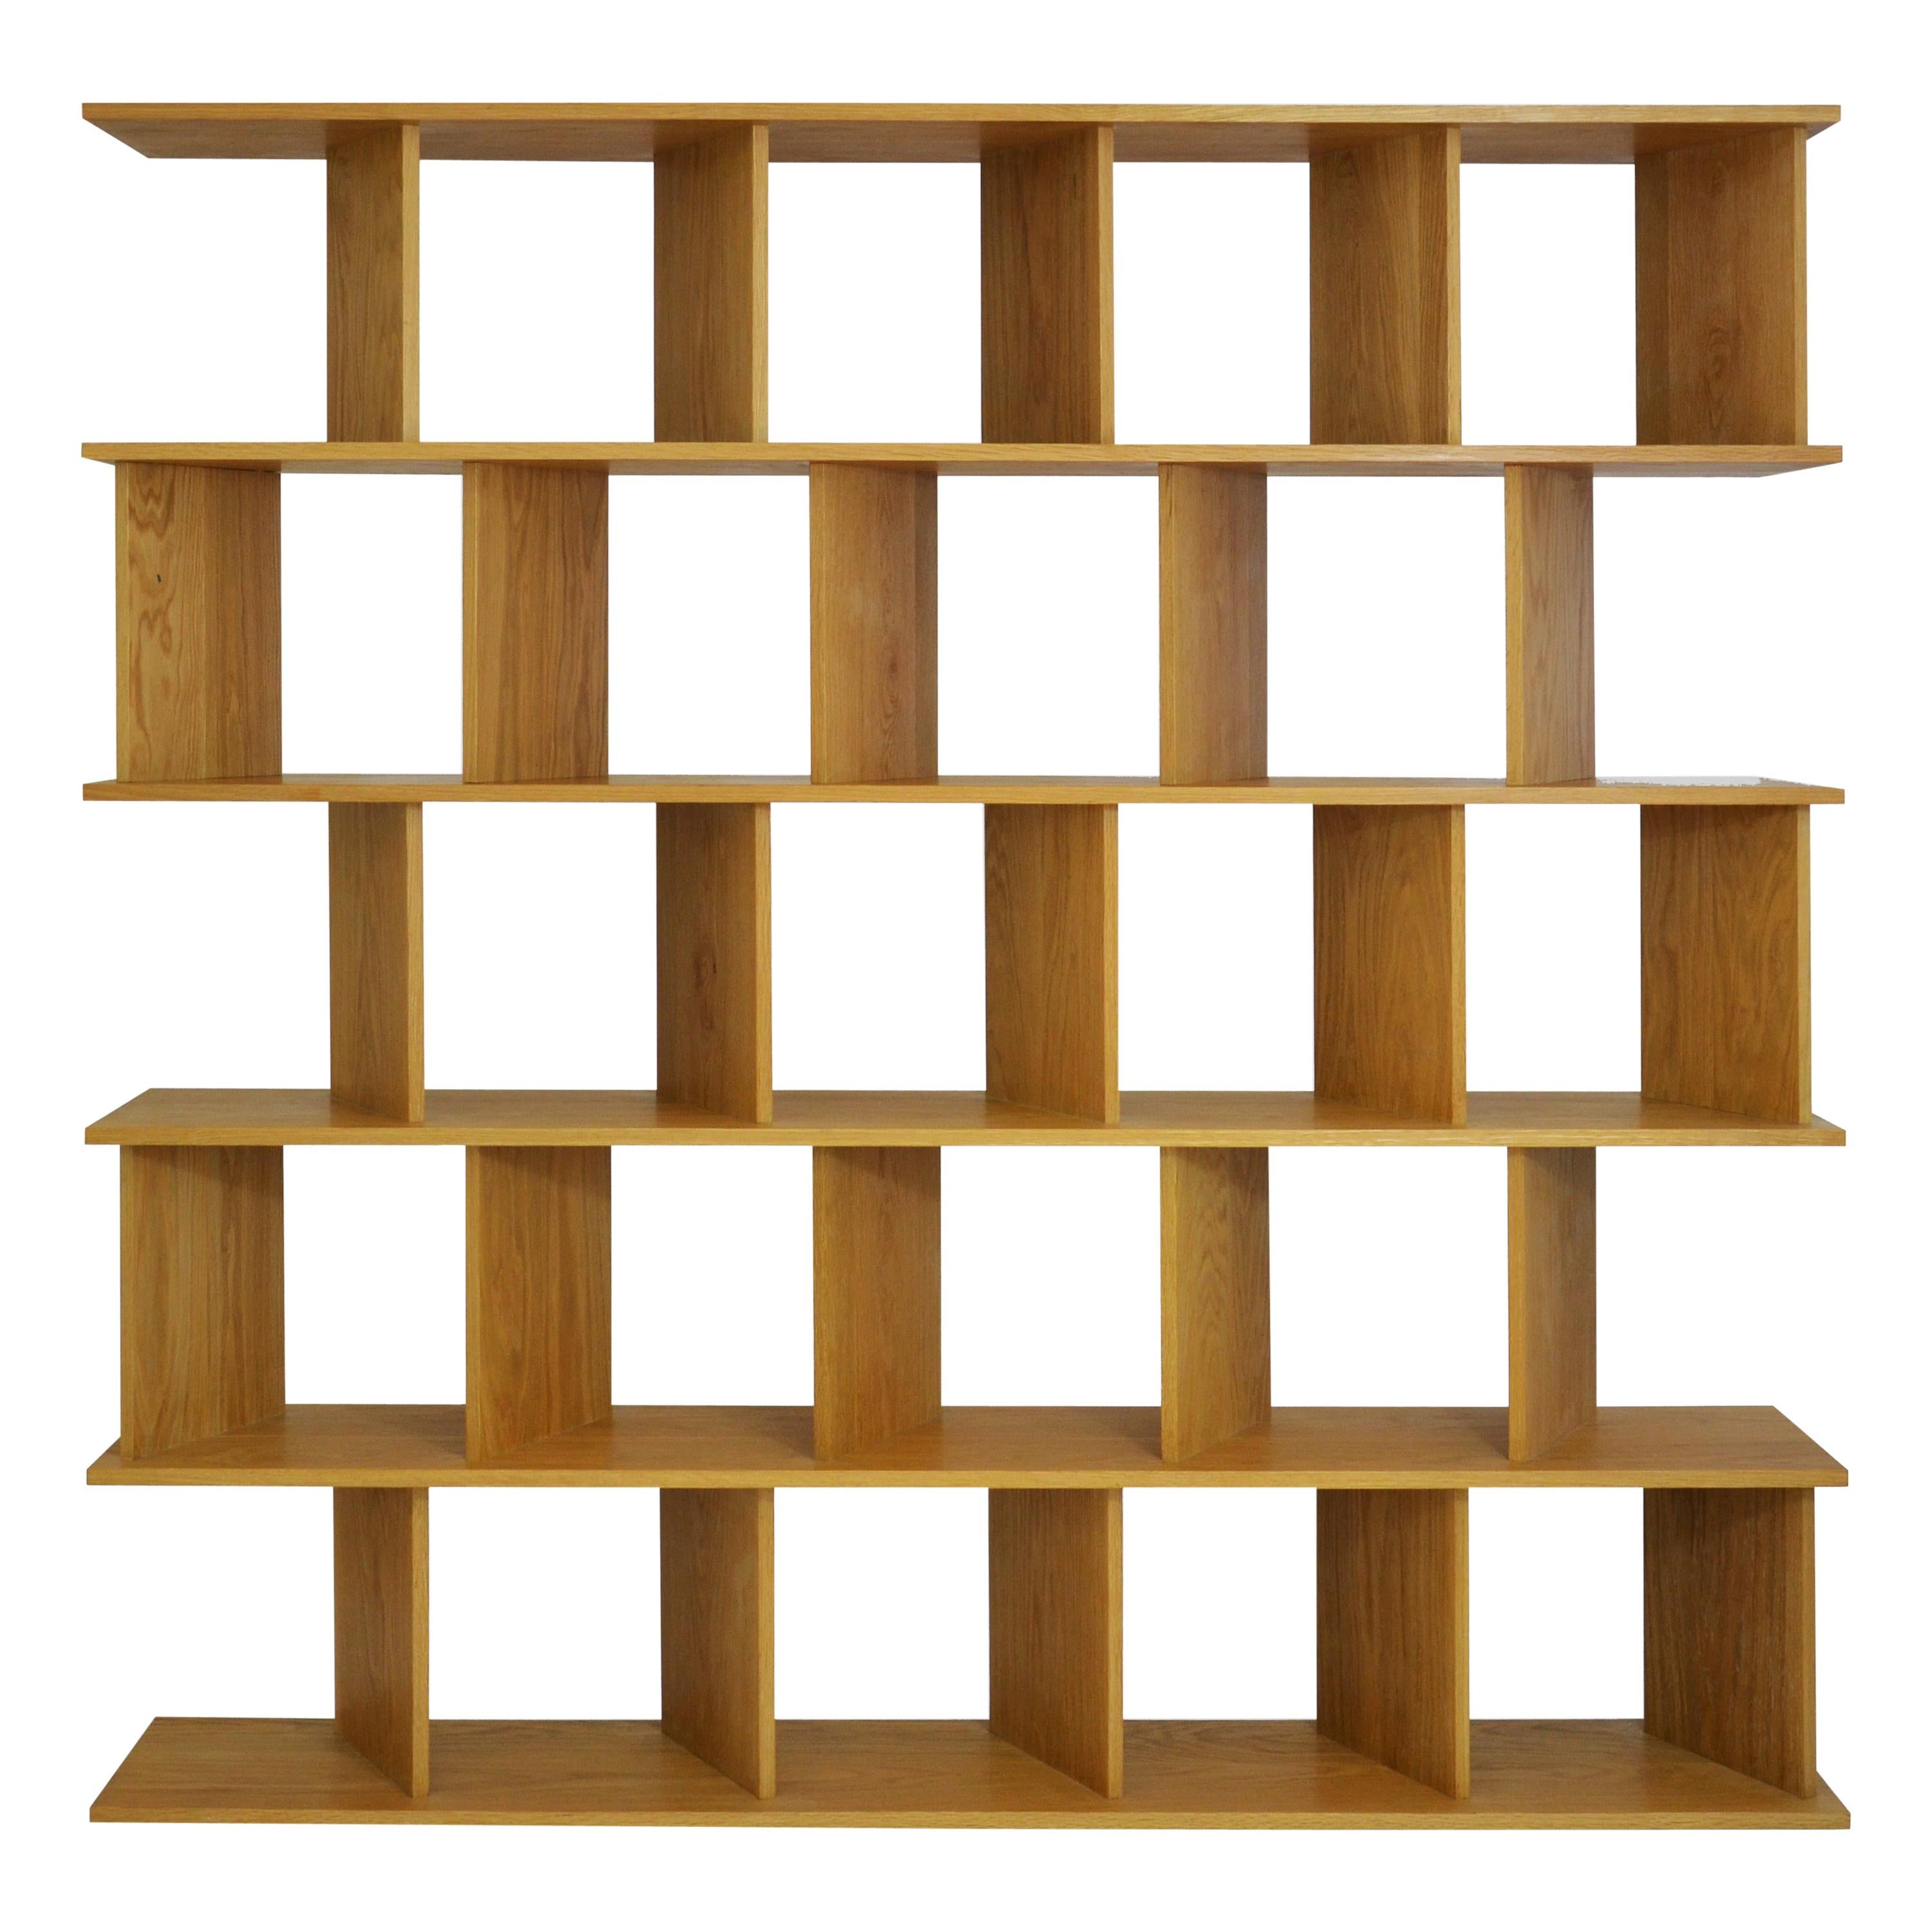 Contemporary Room Divider Shelving "30/30 L" in Oak by Casey Lurie Studio